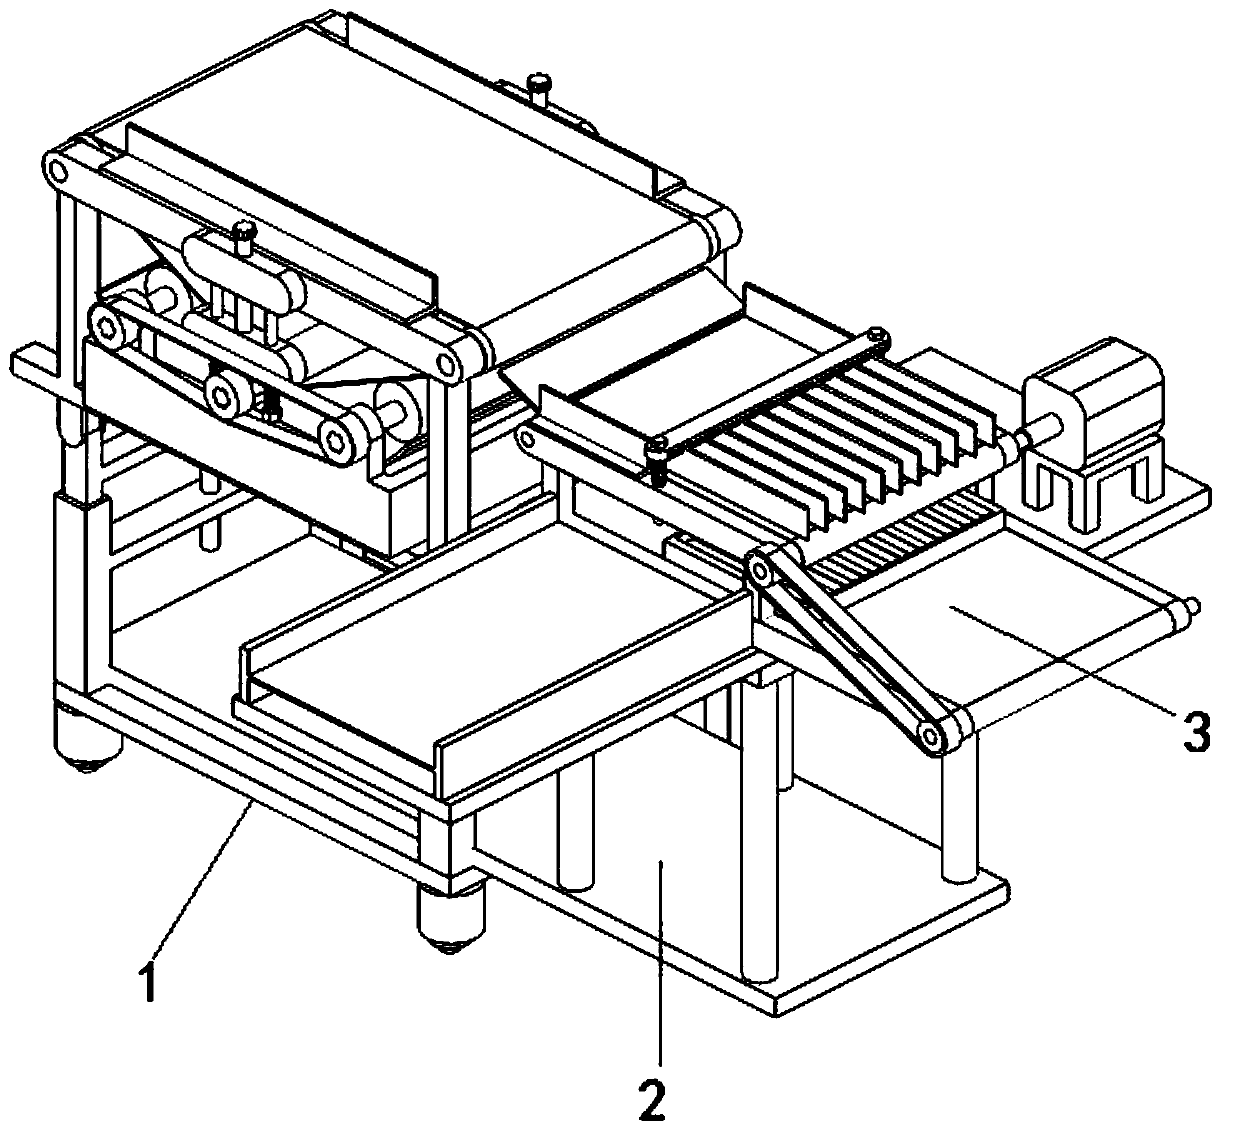 Auxiliary equipment for speaker assembly processing